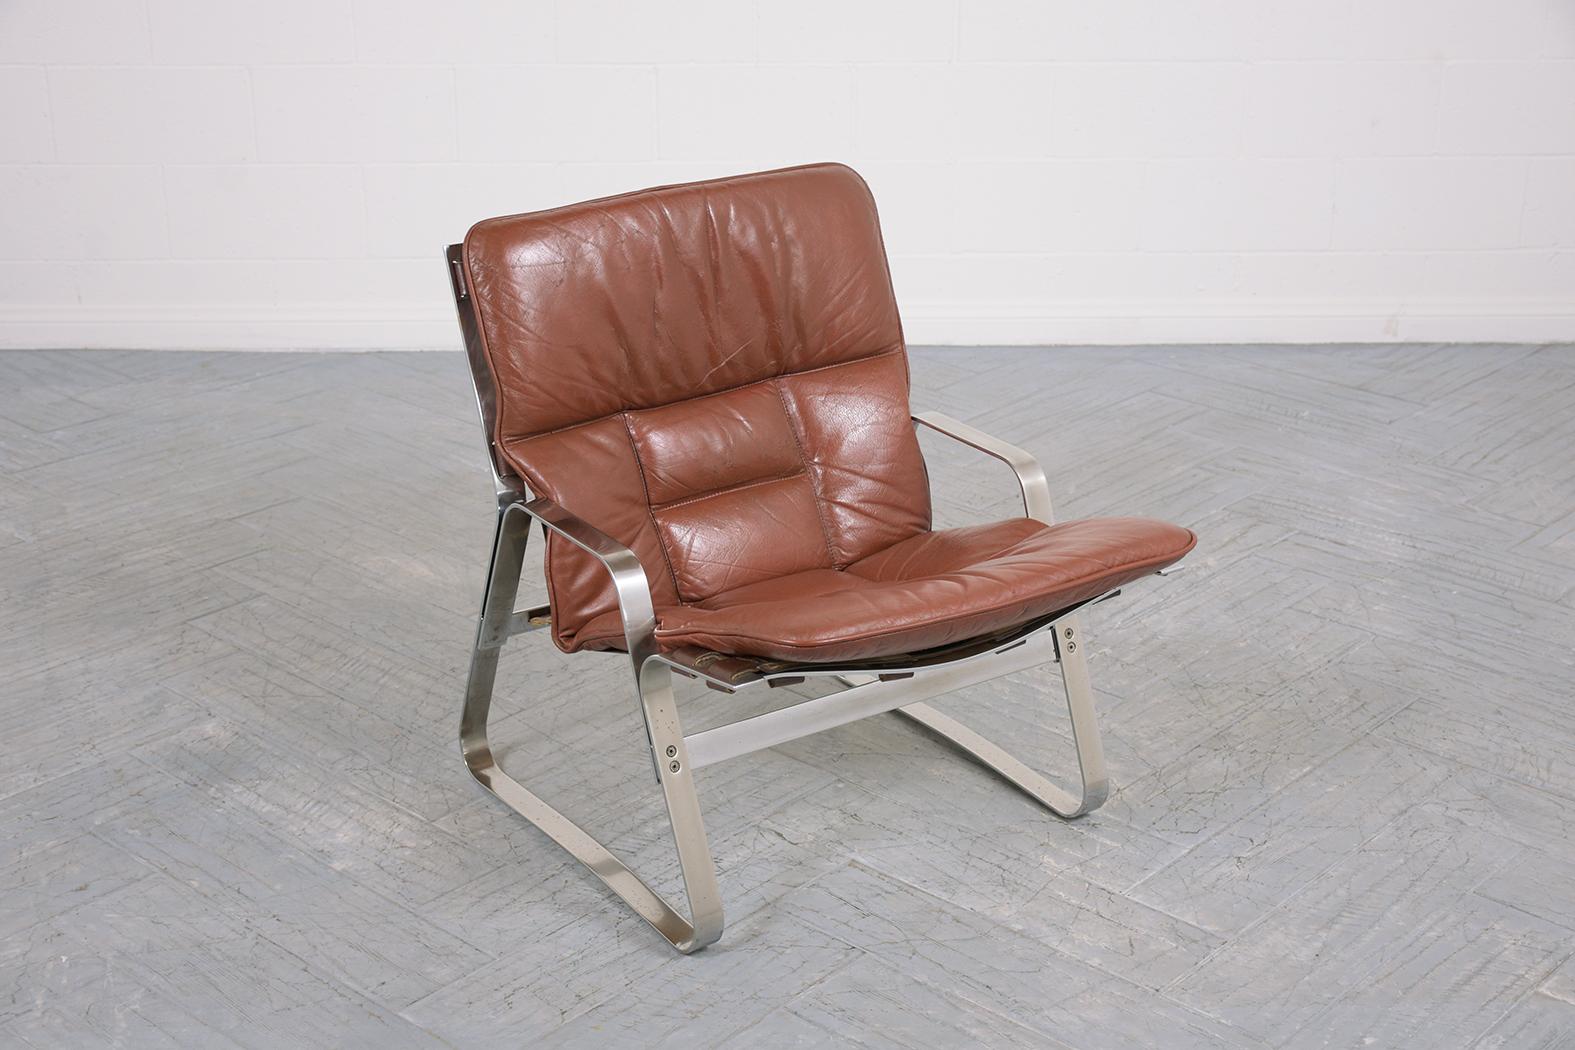 Lacquer Restored Elsa & Nordahl Solheim Mid-Century Modern Leather Chrome Lounge Chairs